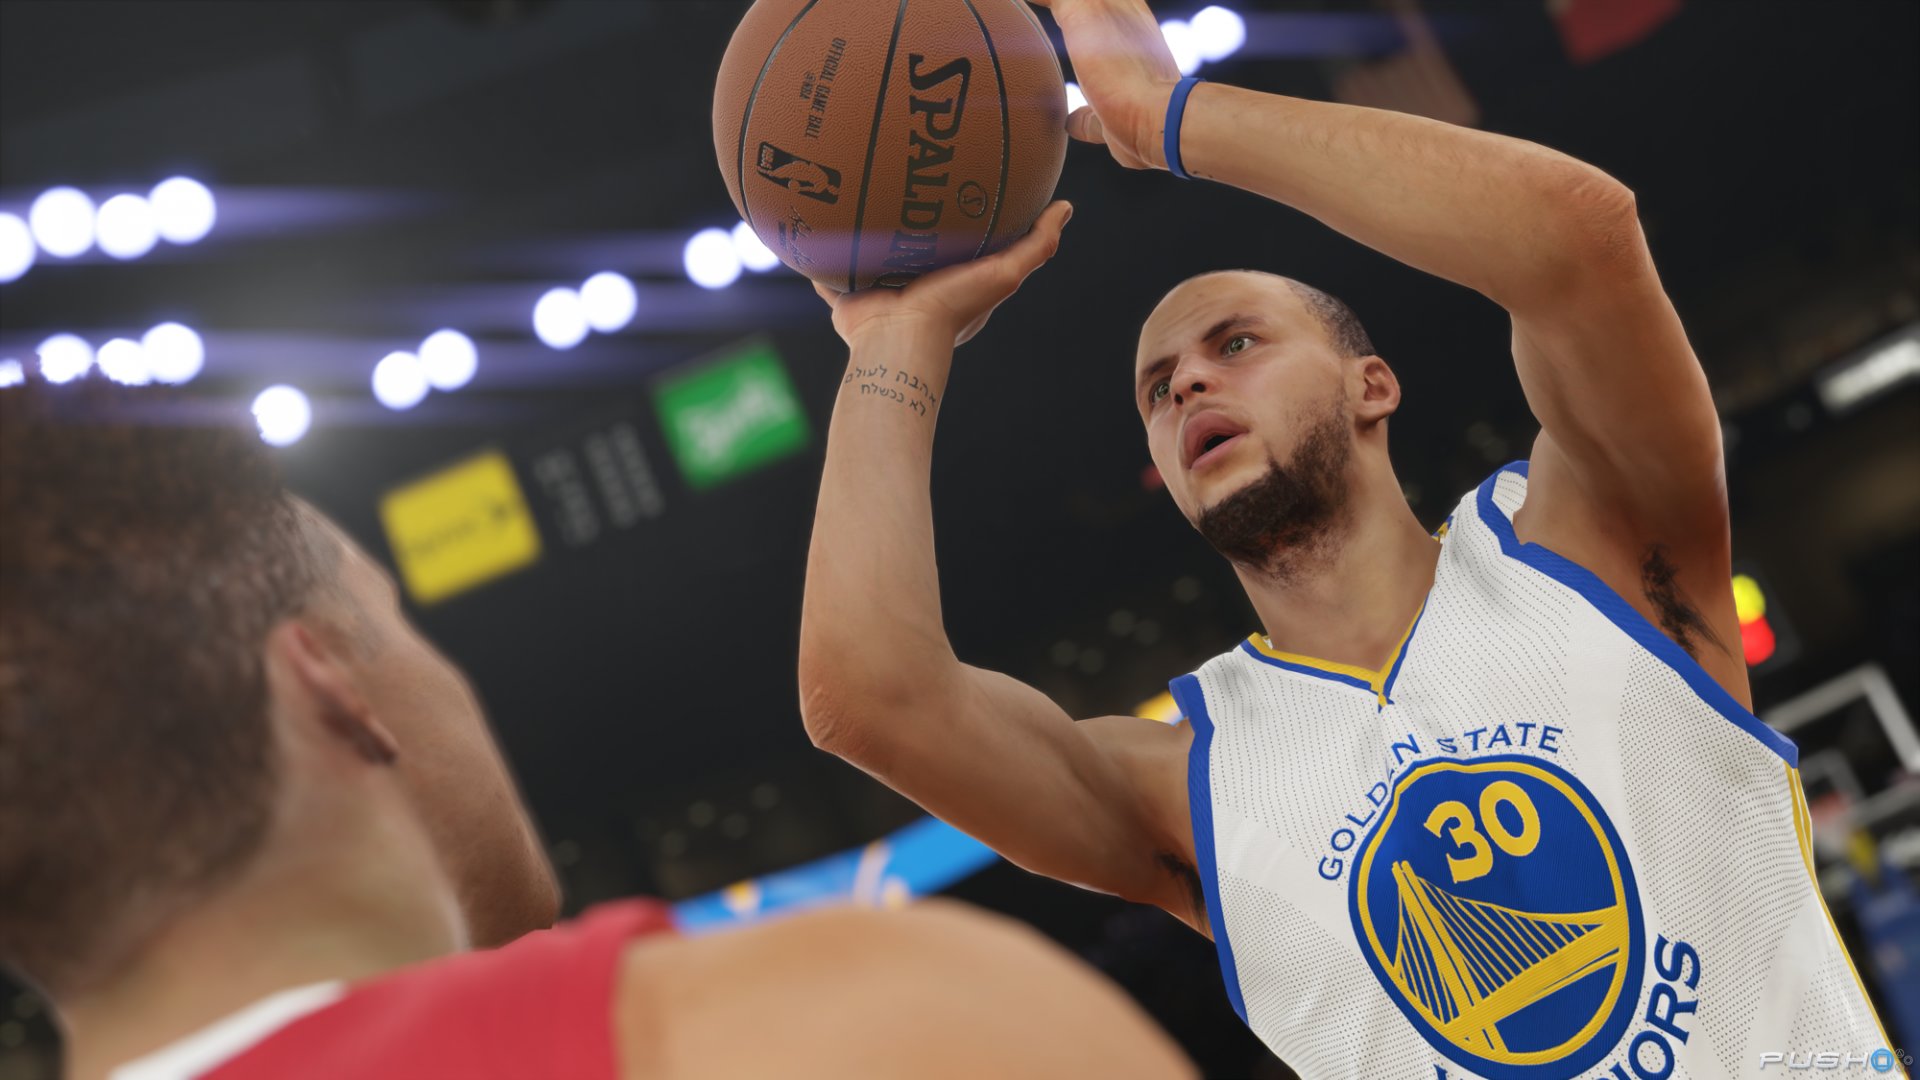 Nba 2k16 Trailer Highlights Steph Curry S Story The